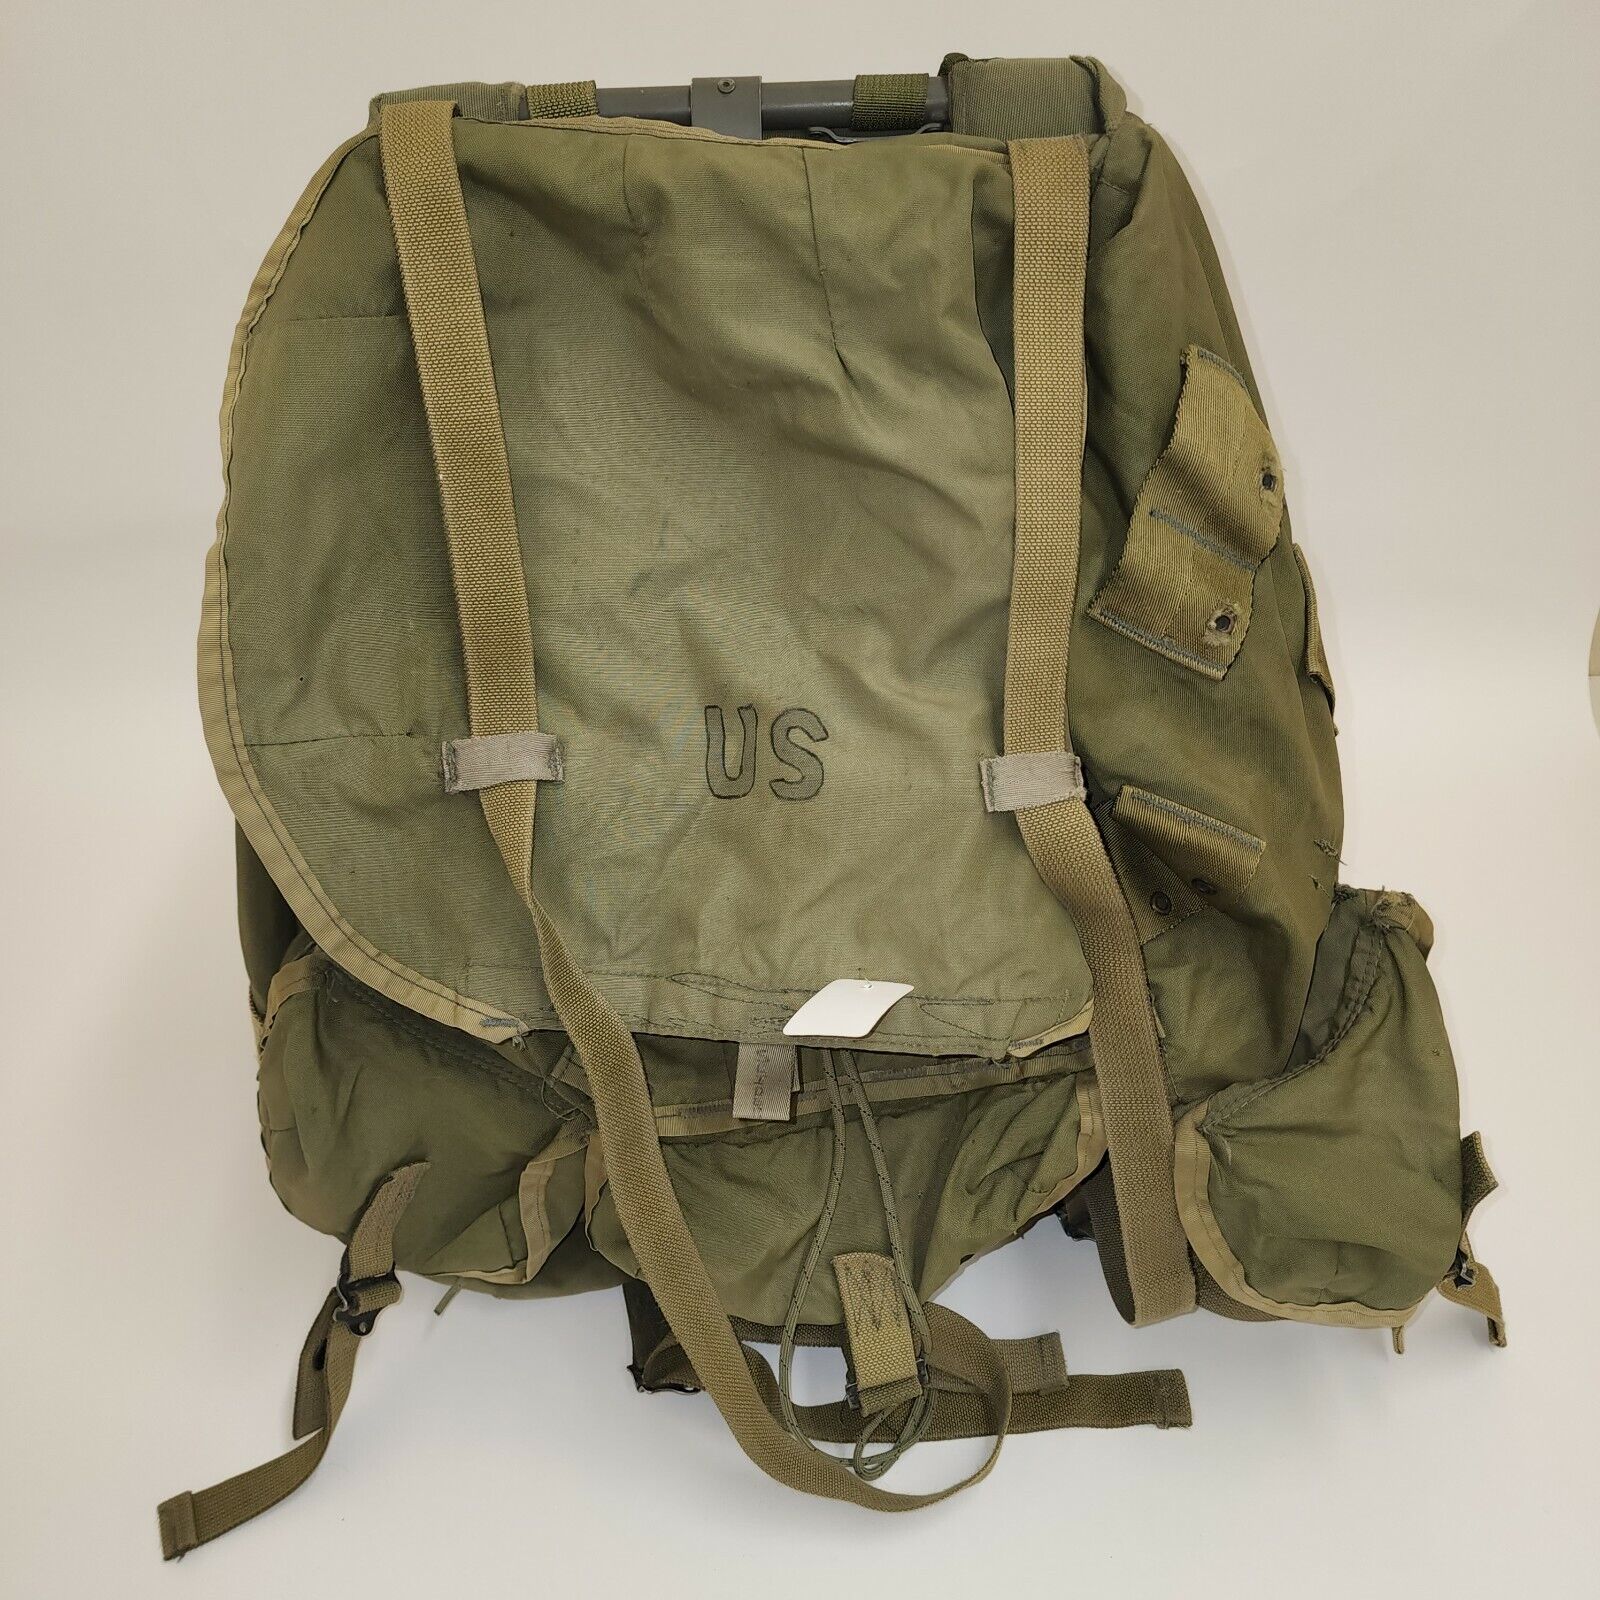 Military Alice Pack (Large), Complete with Frame & Straps